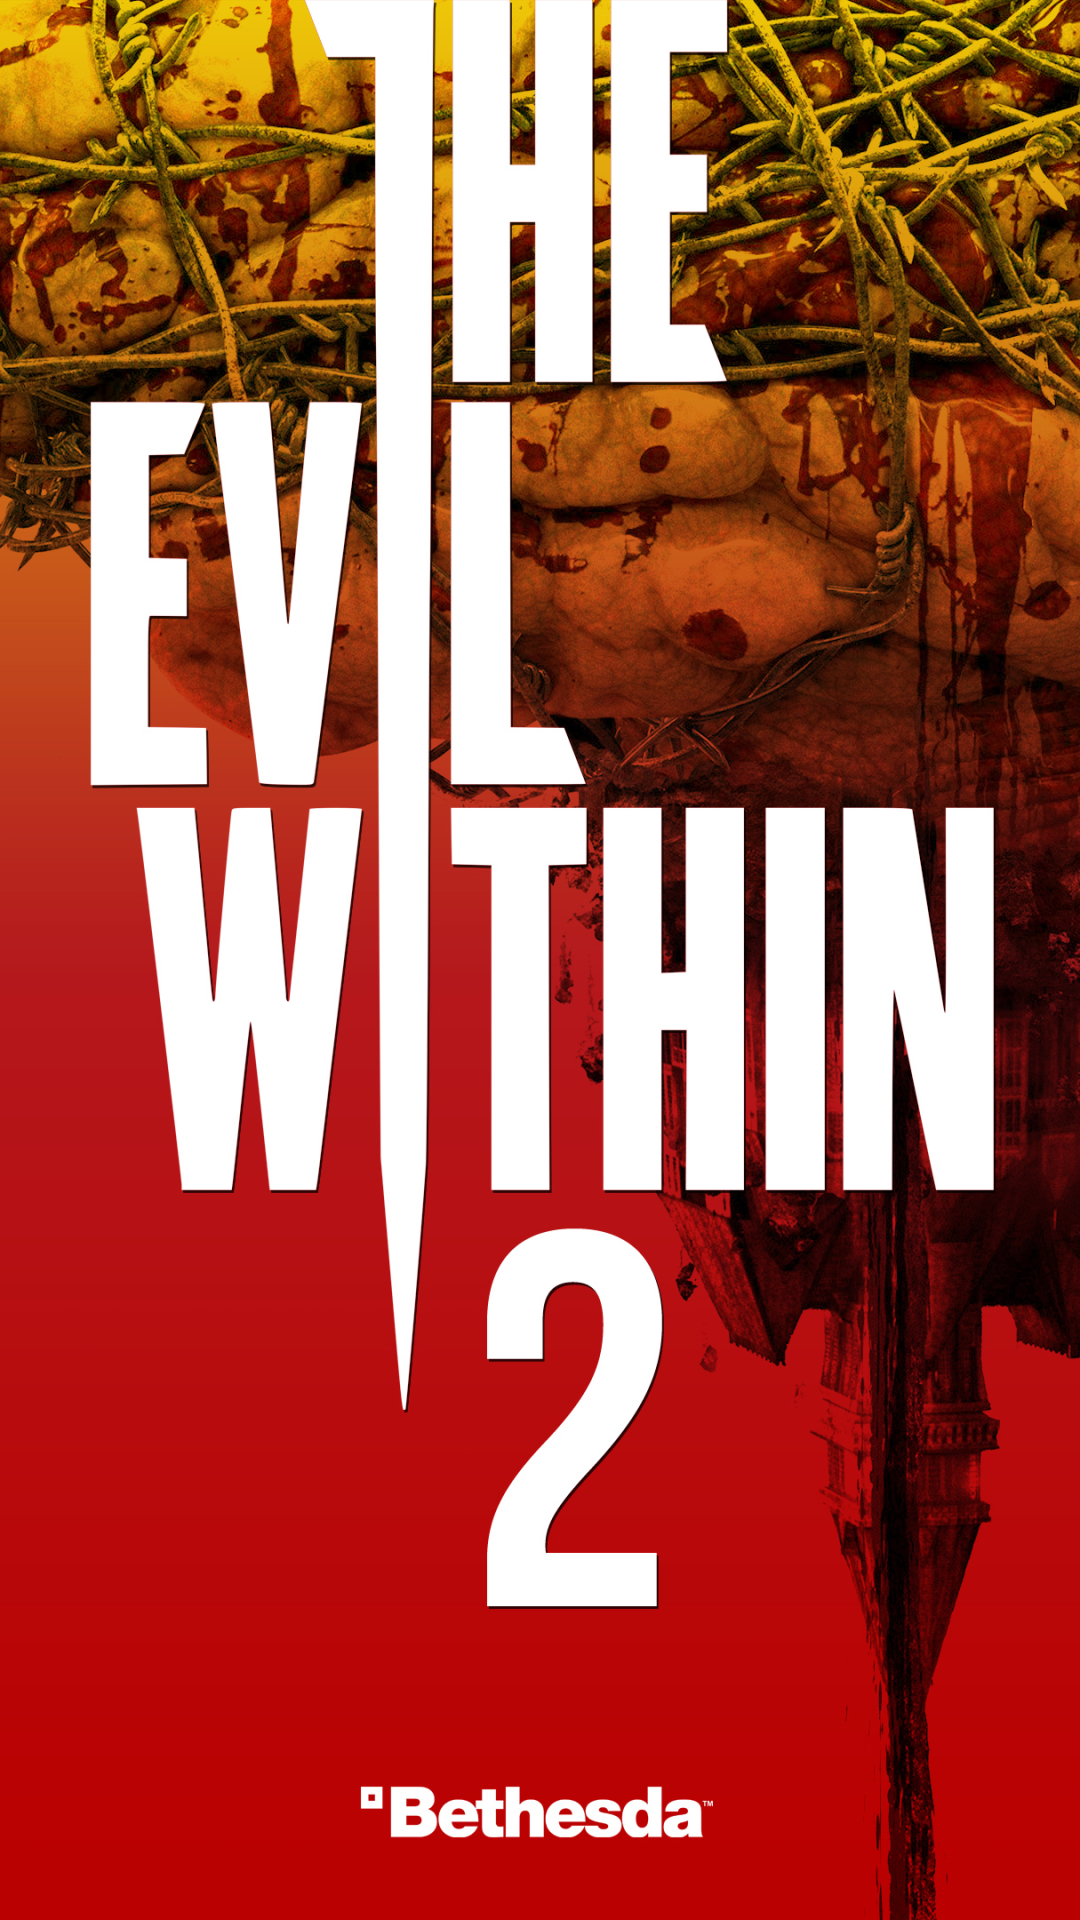 video game, the evil within 2